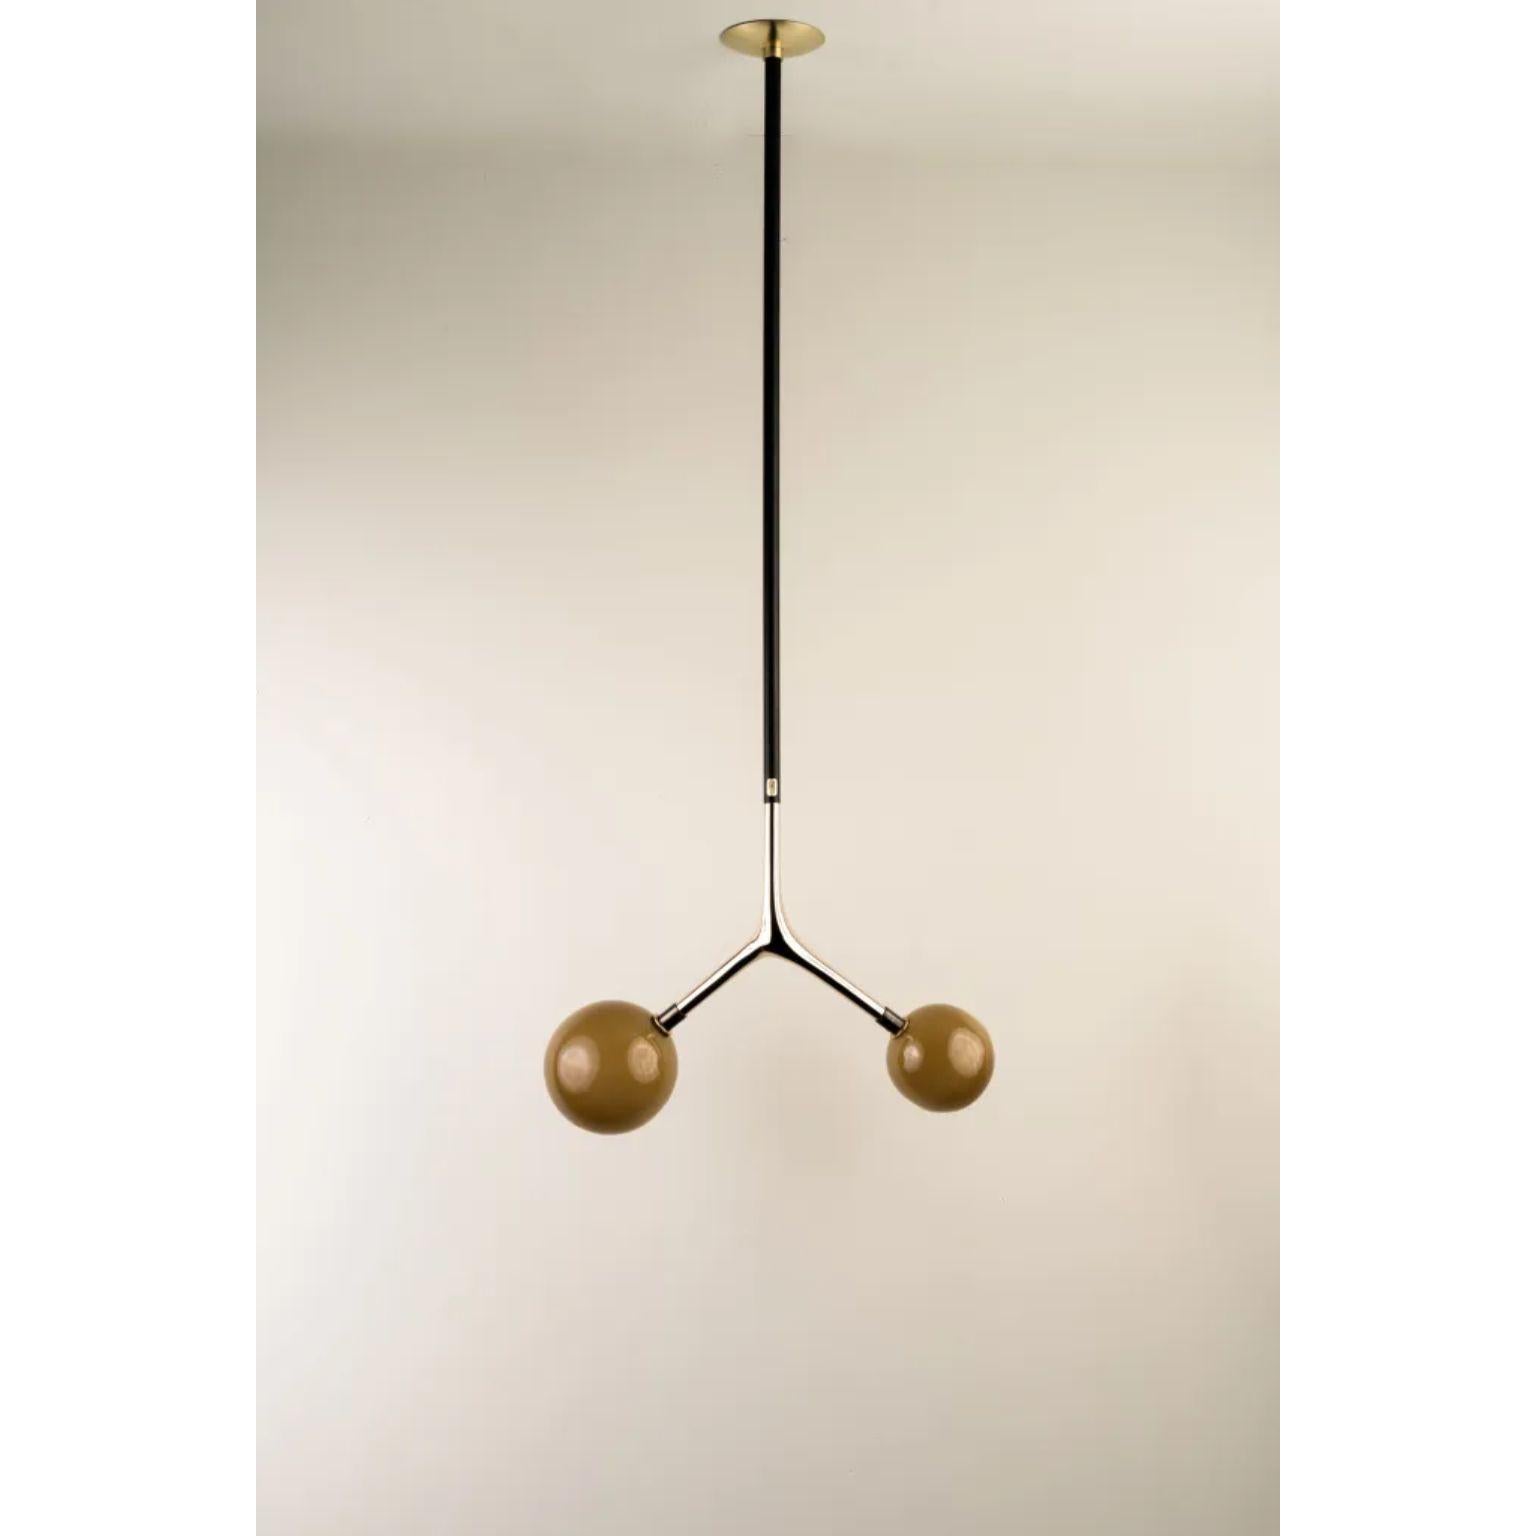 Sand Dupla Pendant Lamp by Isabel Moncada
Dimensions: W 45 x D 20 x H 125 cm.
Materials: Brass, cast bronze and blown glass.

Dupla hangs from the ceiling just like a branch with its fruits. The customizable length options allow play with scale and